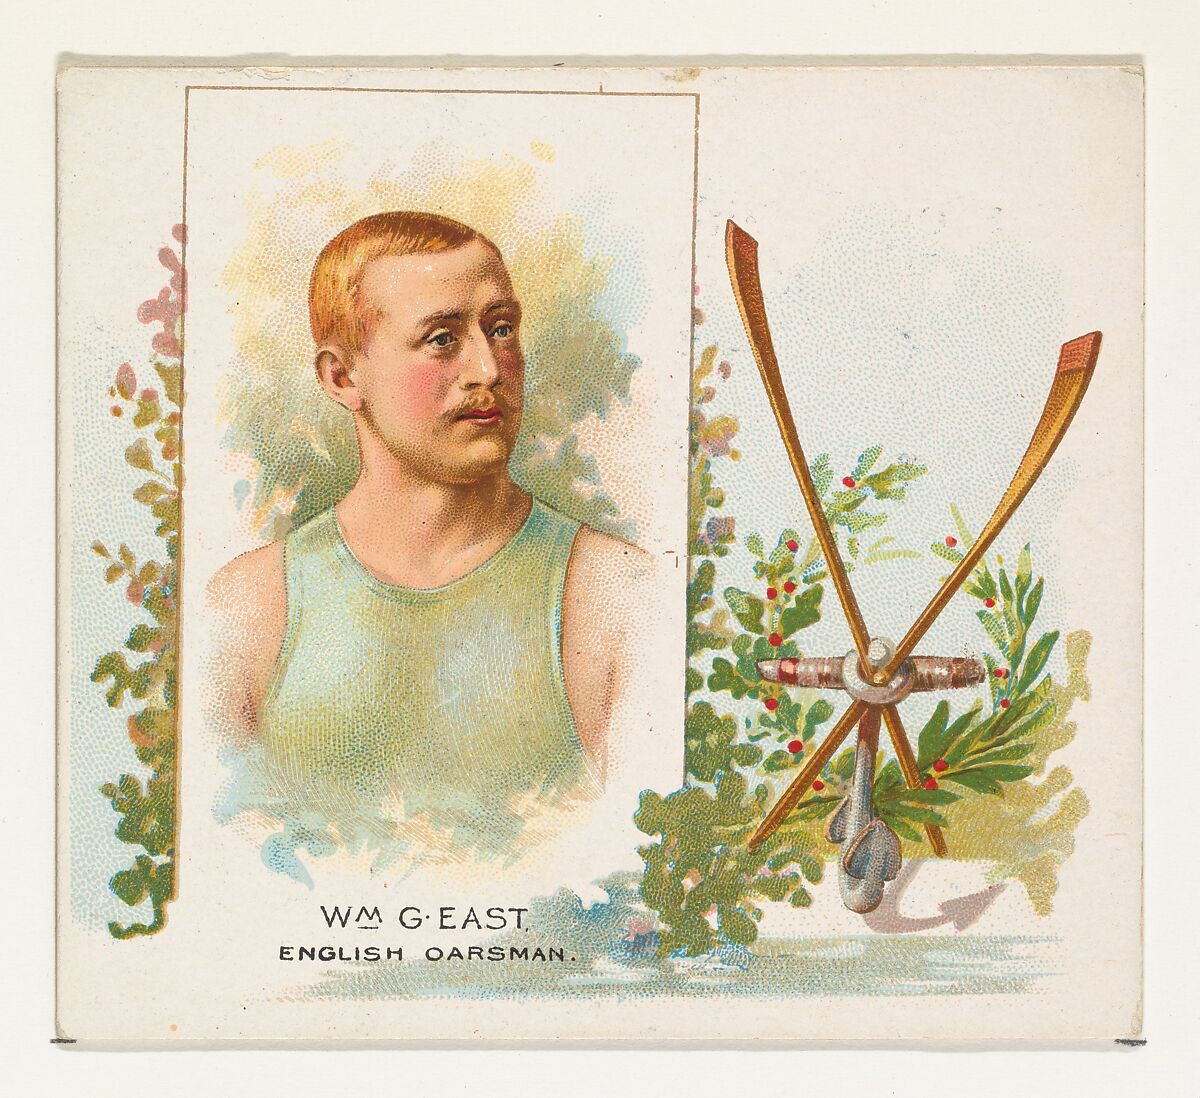 William G. East, English Oarsman, from World's Champions, Second Series (N43) for Allen & Ginter Cigarettes, Allen &amp; Ginter (American, Richmond, Virginia), Commercial lithograph 